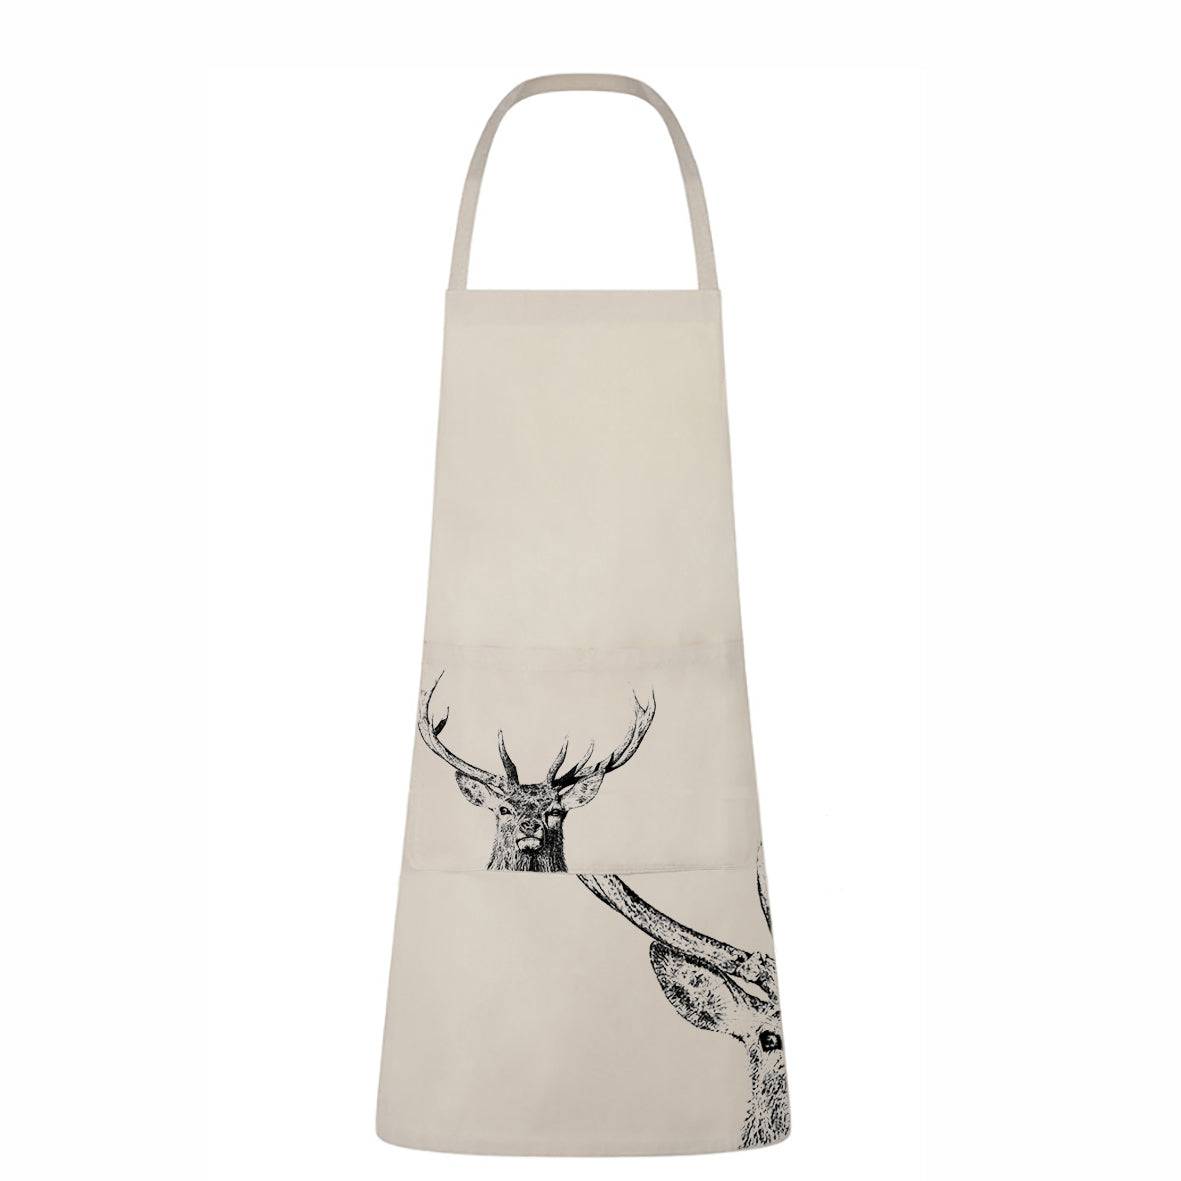 Majestic Stag Apron with Pocket for sale - Woodcock and Cavendish